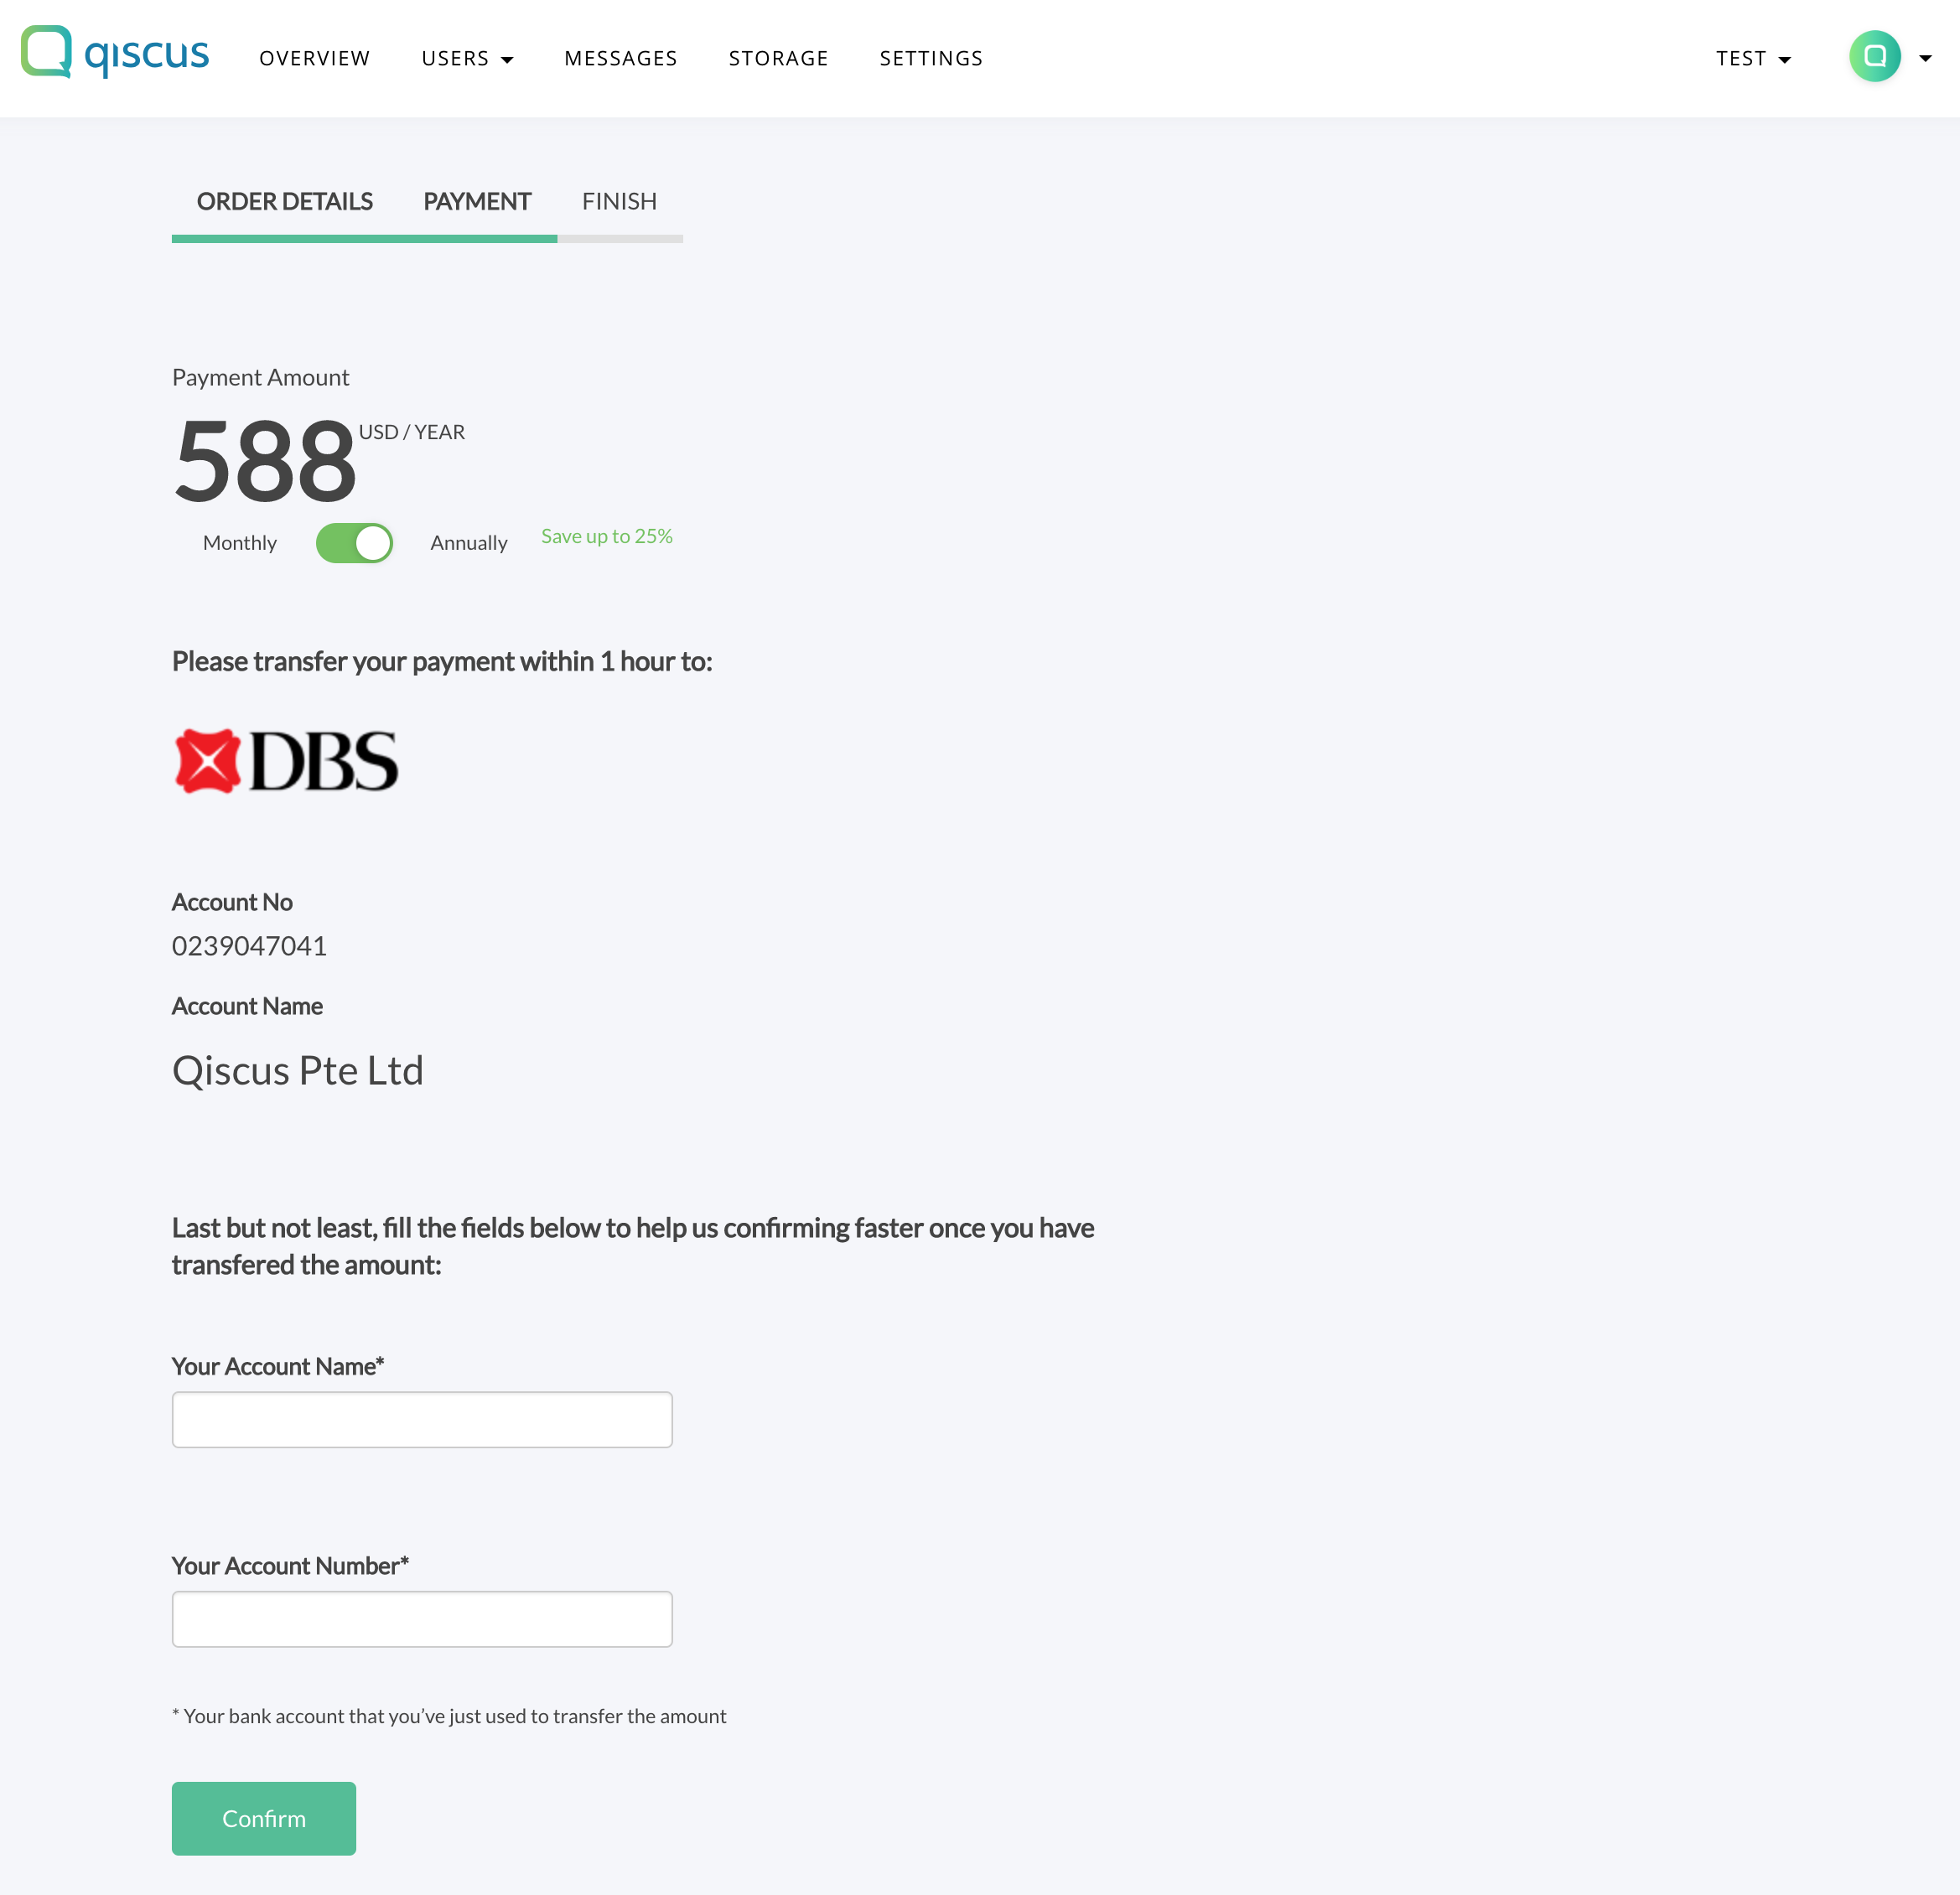 screencapture-qiscus-dashboard-payment-form-4796-starter-2018-10-08-13_50_48.png